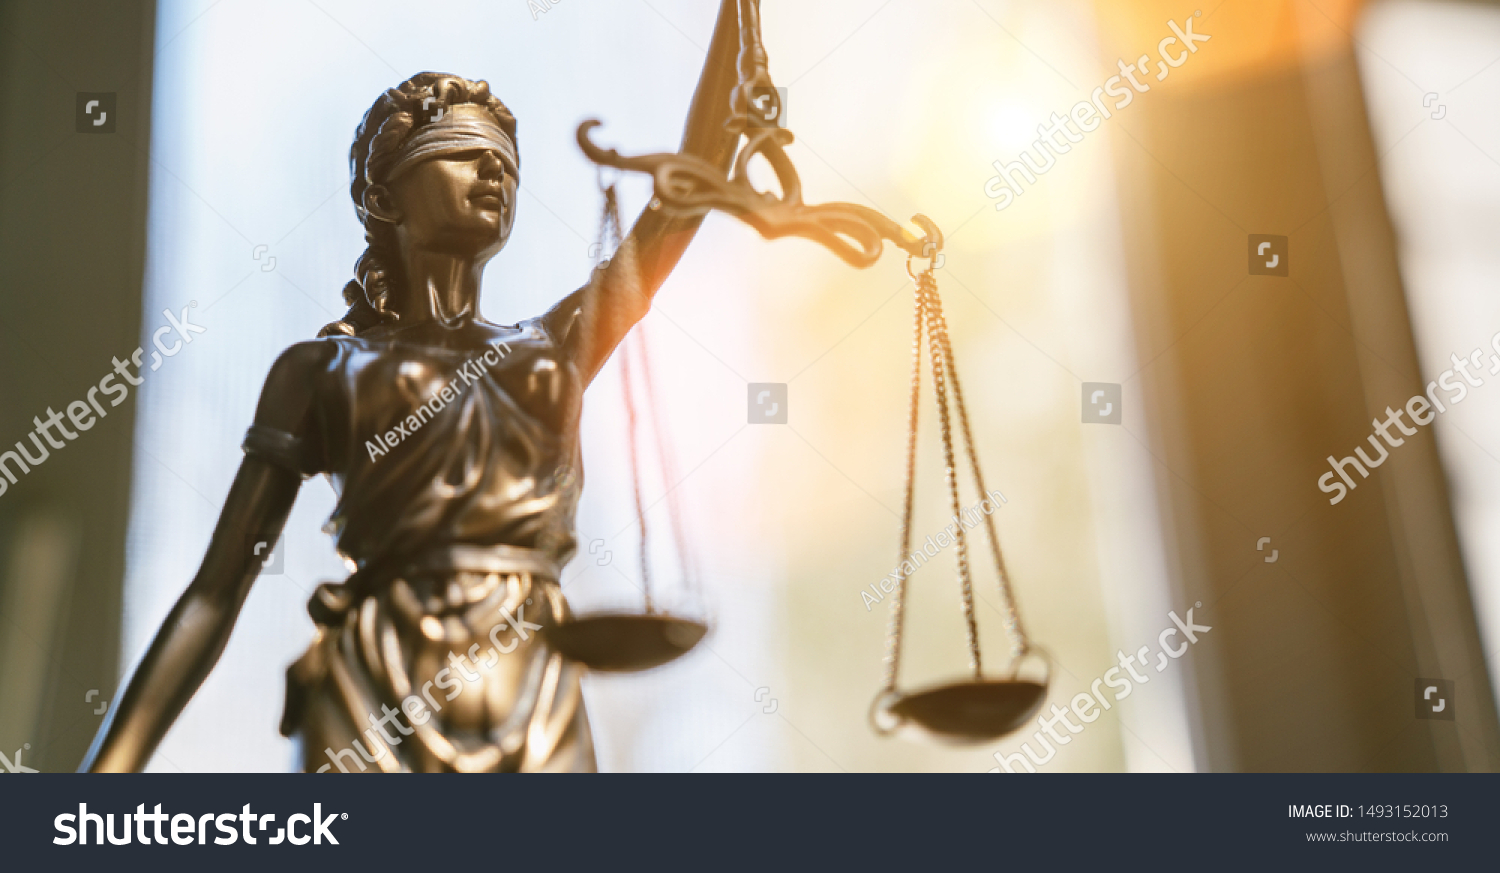 The Statue of Justice - lady justice or Iustitia / Justitia the Roman goddess of Justice #1493152013